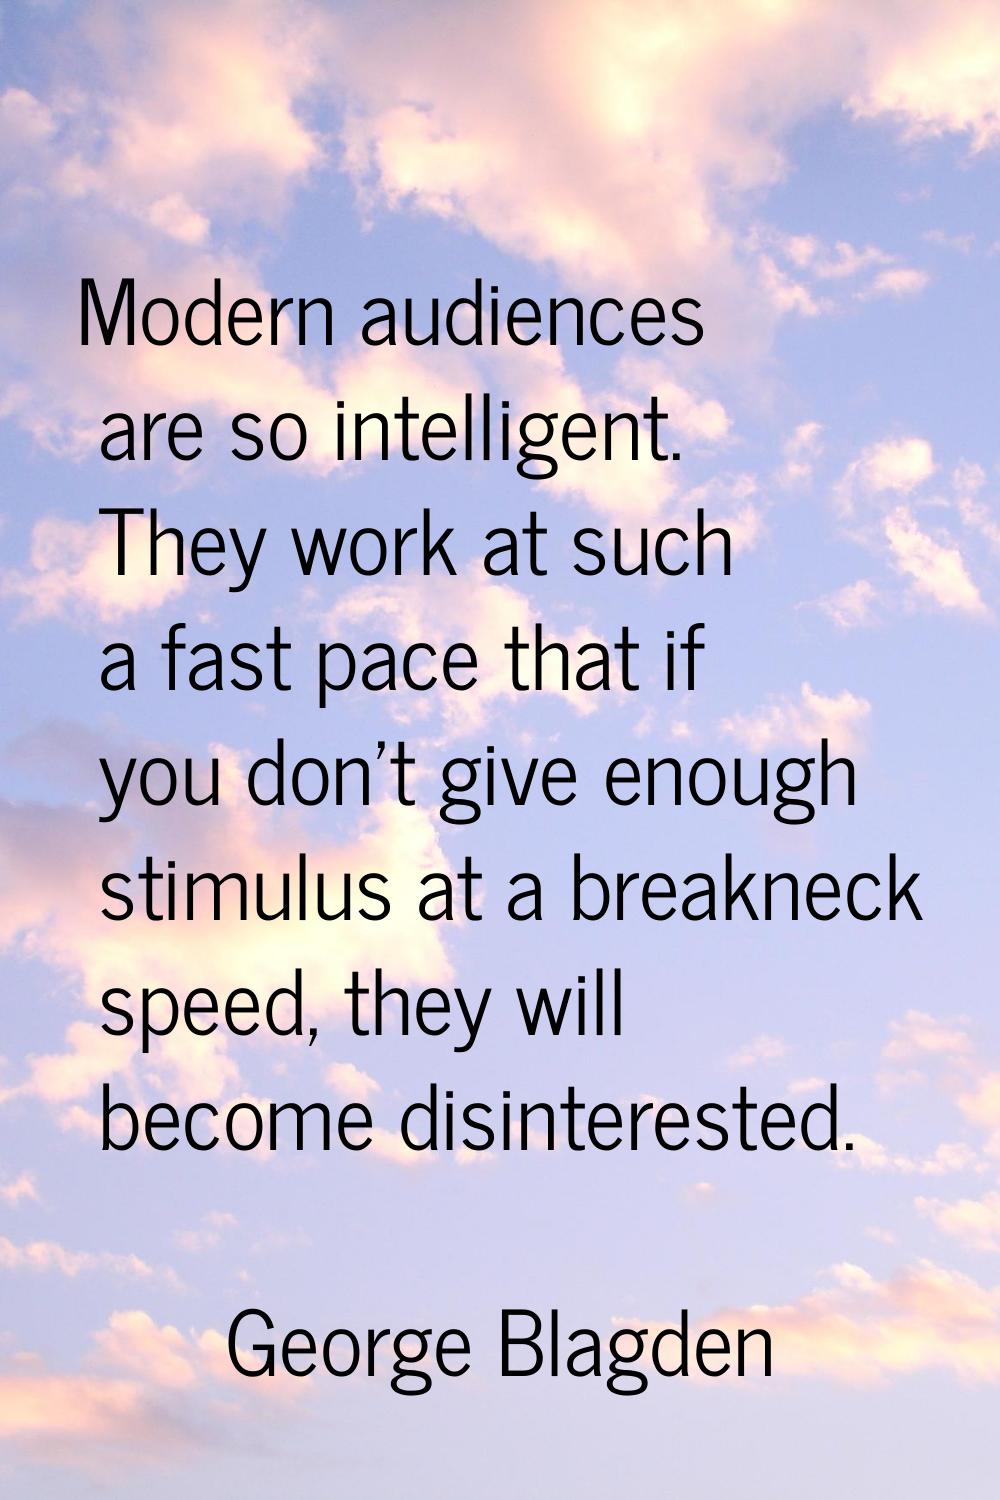 Modern audiences are so intelligent. They work at such a fast pace that if you don't give enough st